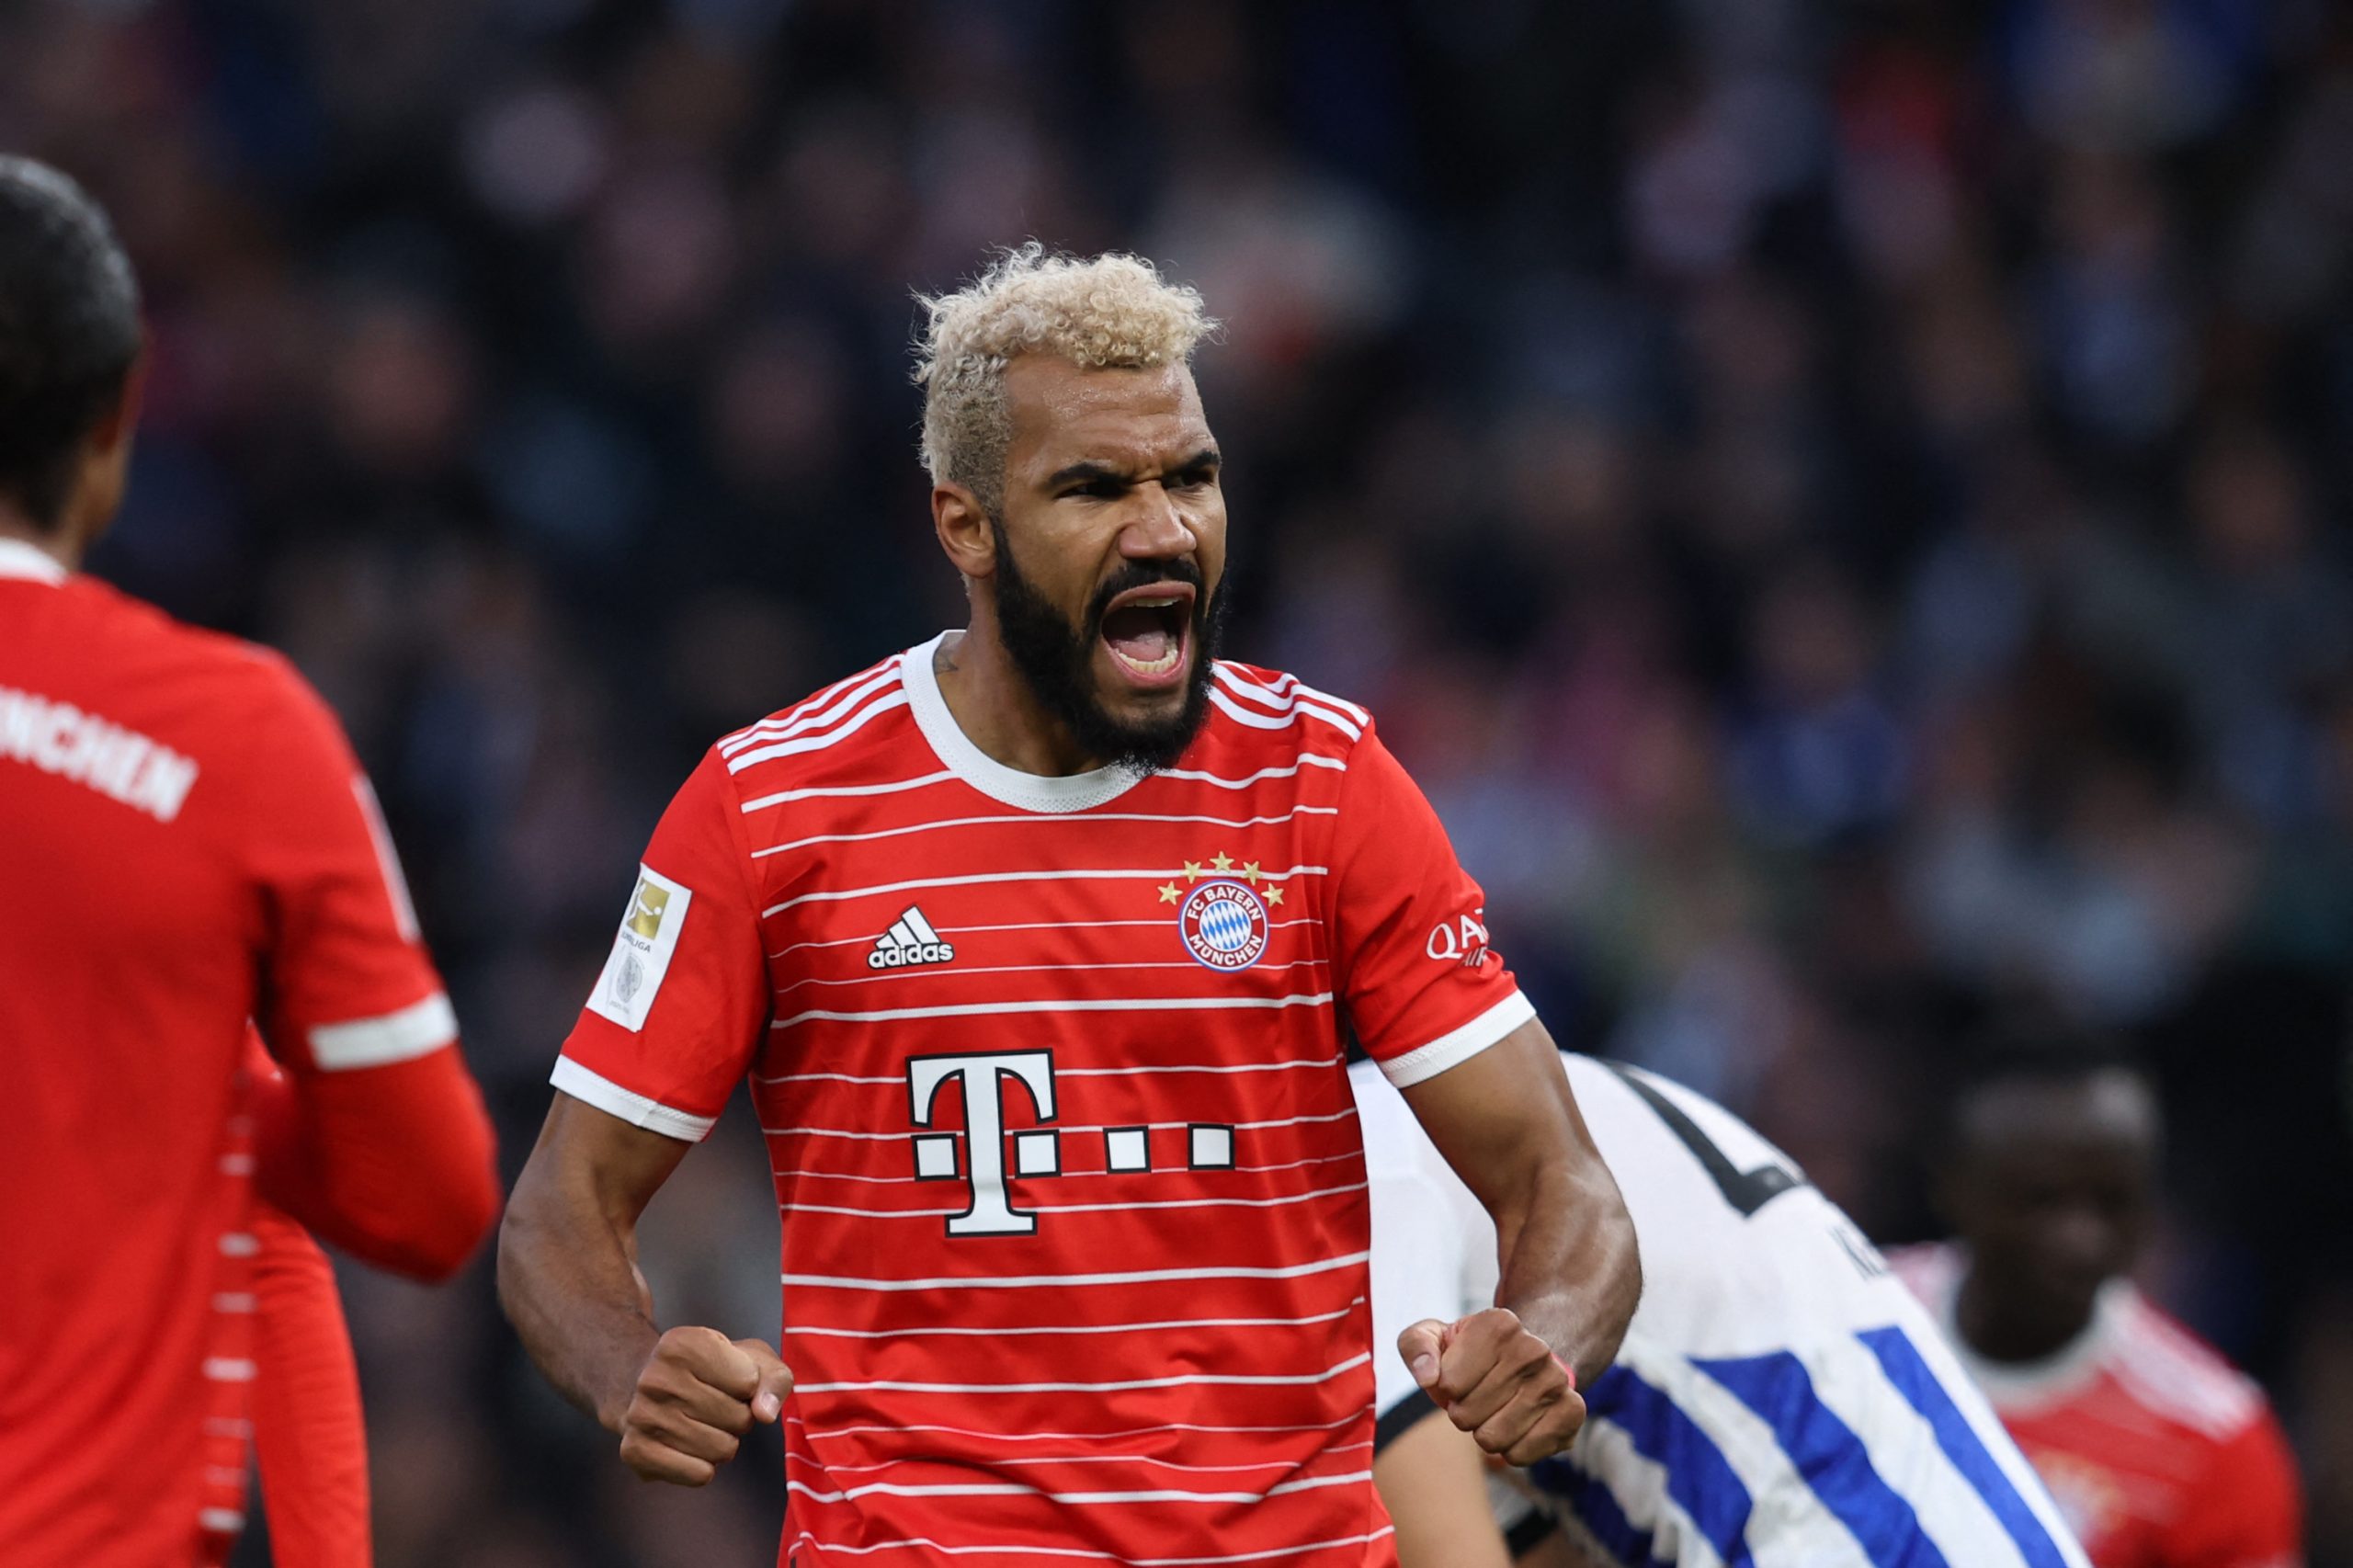 Bayern Munich's Cameroonian forward Eric Maxim Choupo-Moting celebrates scoring his team's second goal (0-2) during the German first division Bundesliga football match between Hertha Berlin and FC Bayern Munich in Berlin on November 5, 2022